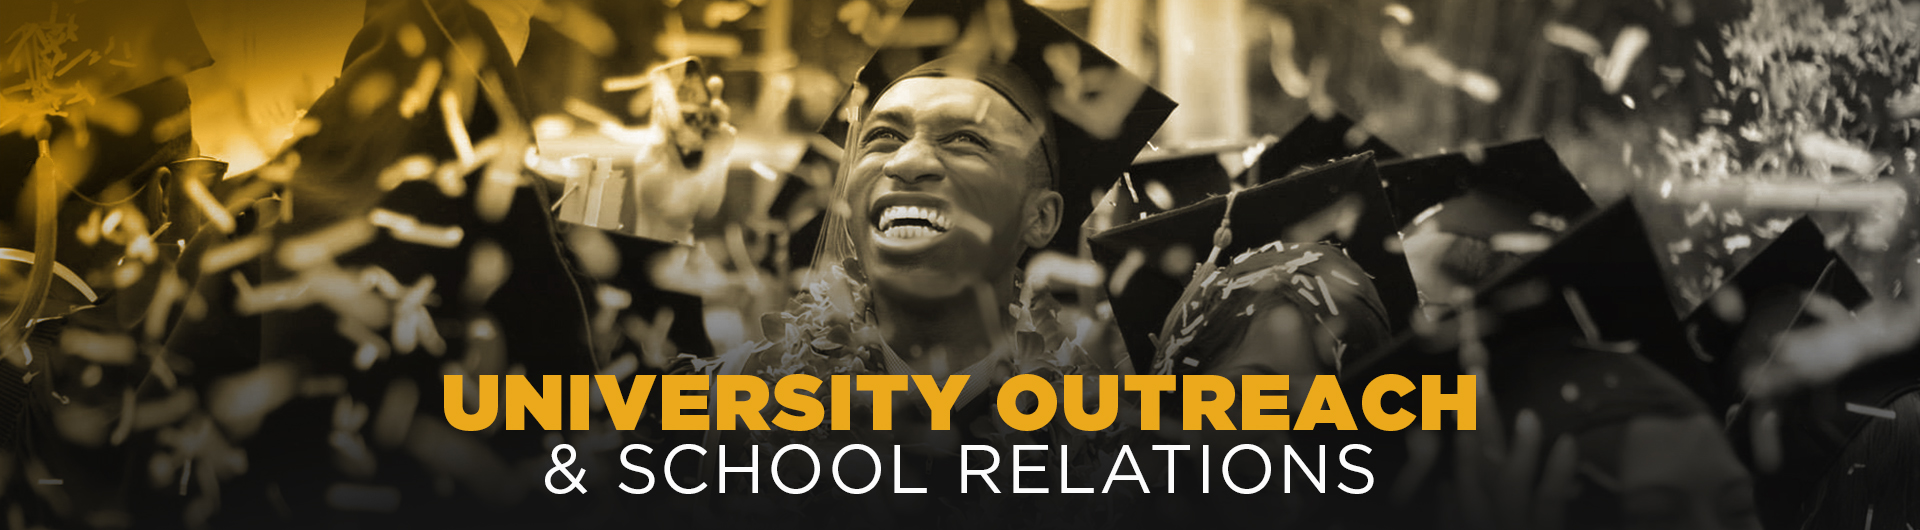 University Outreach & School Relations